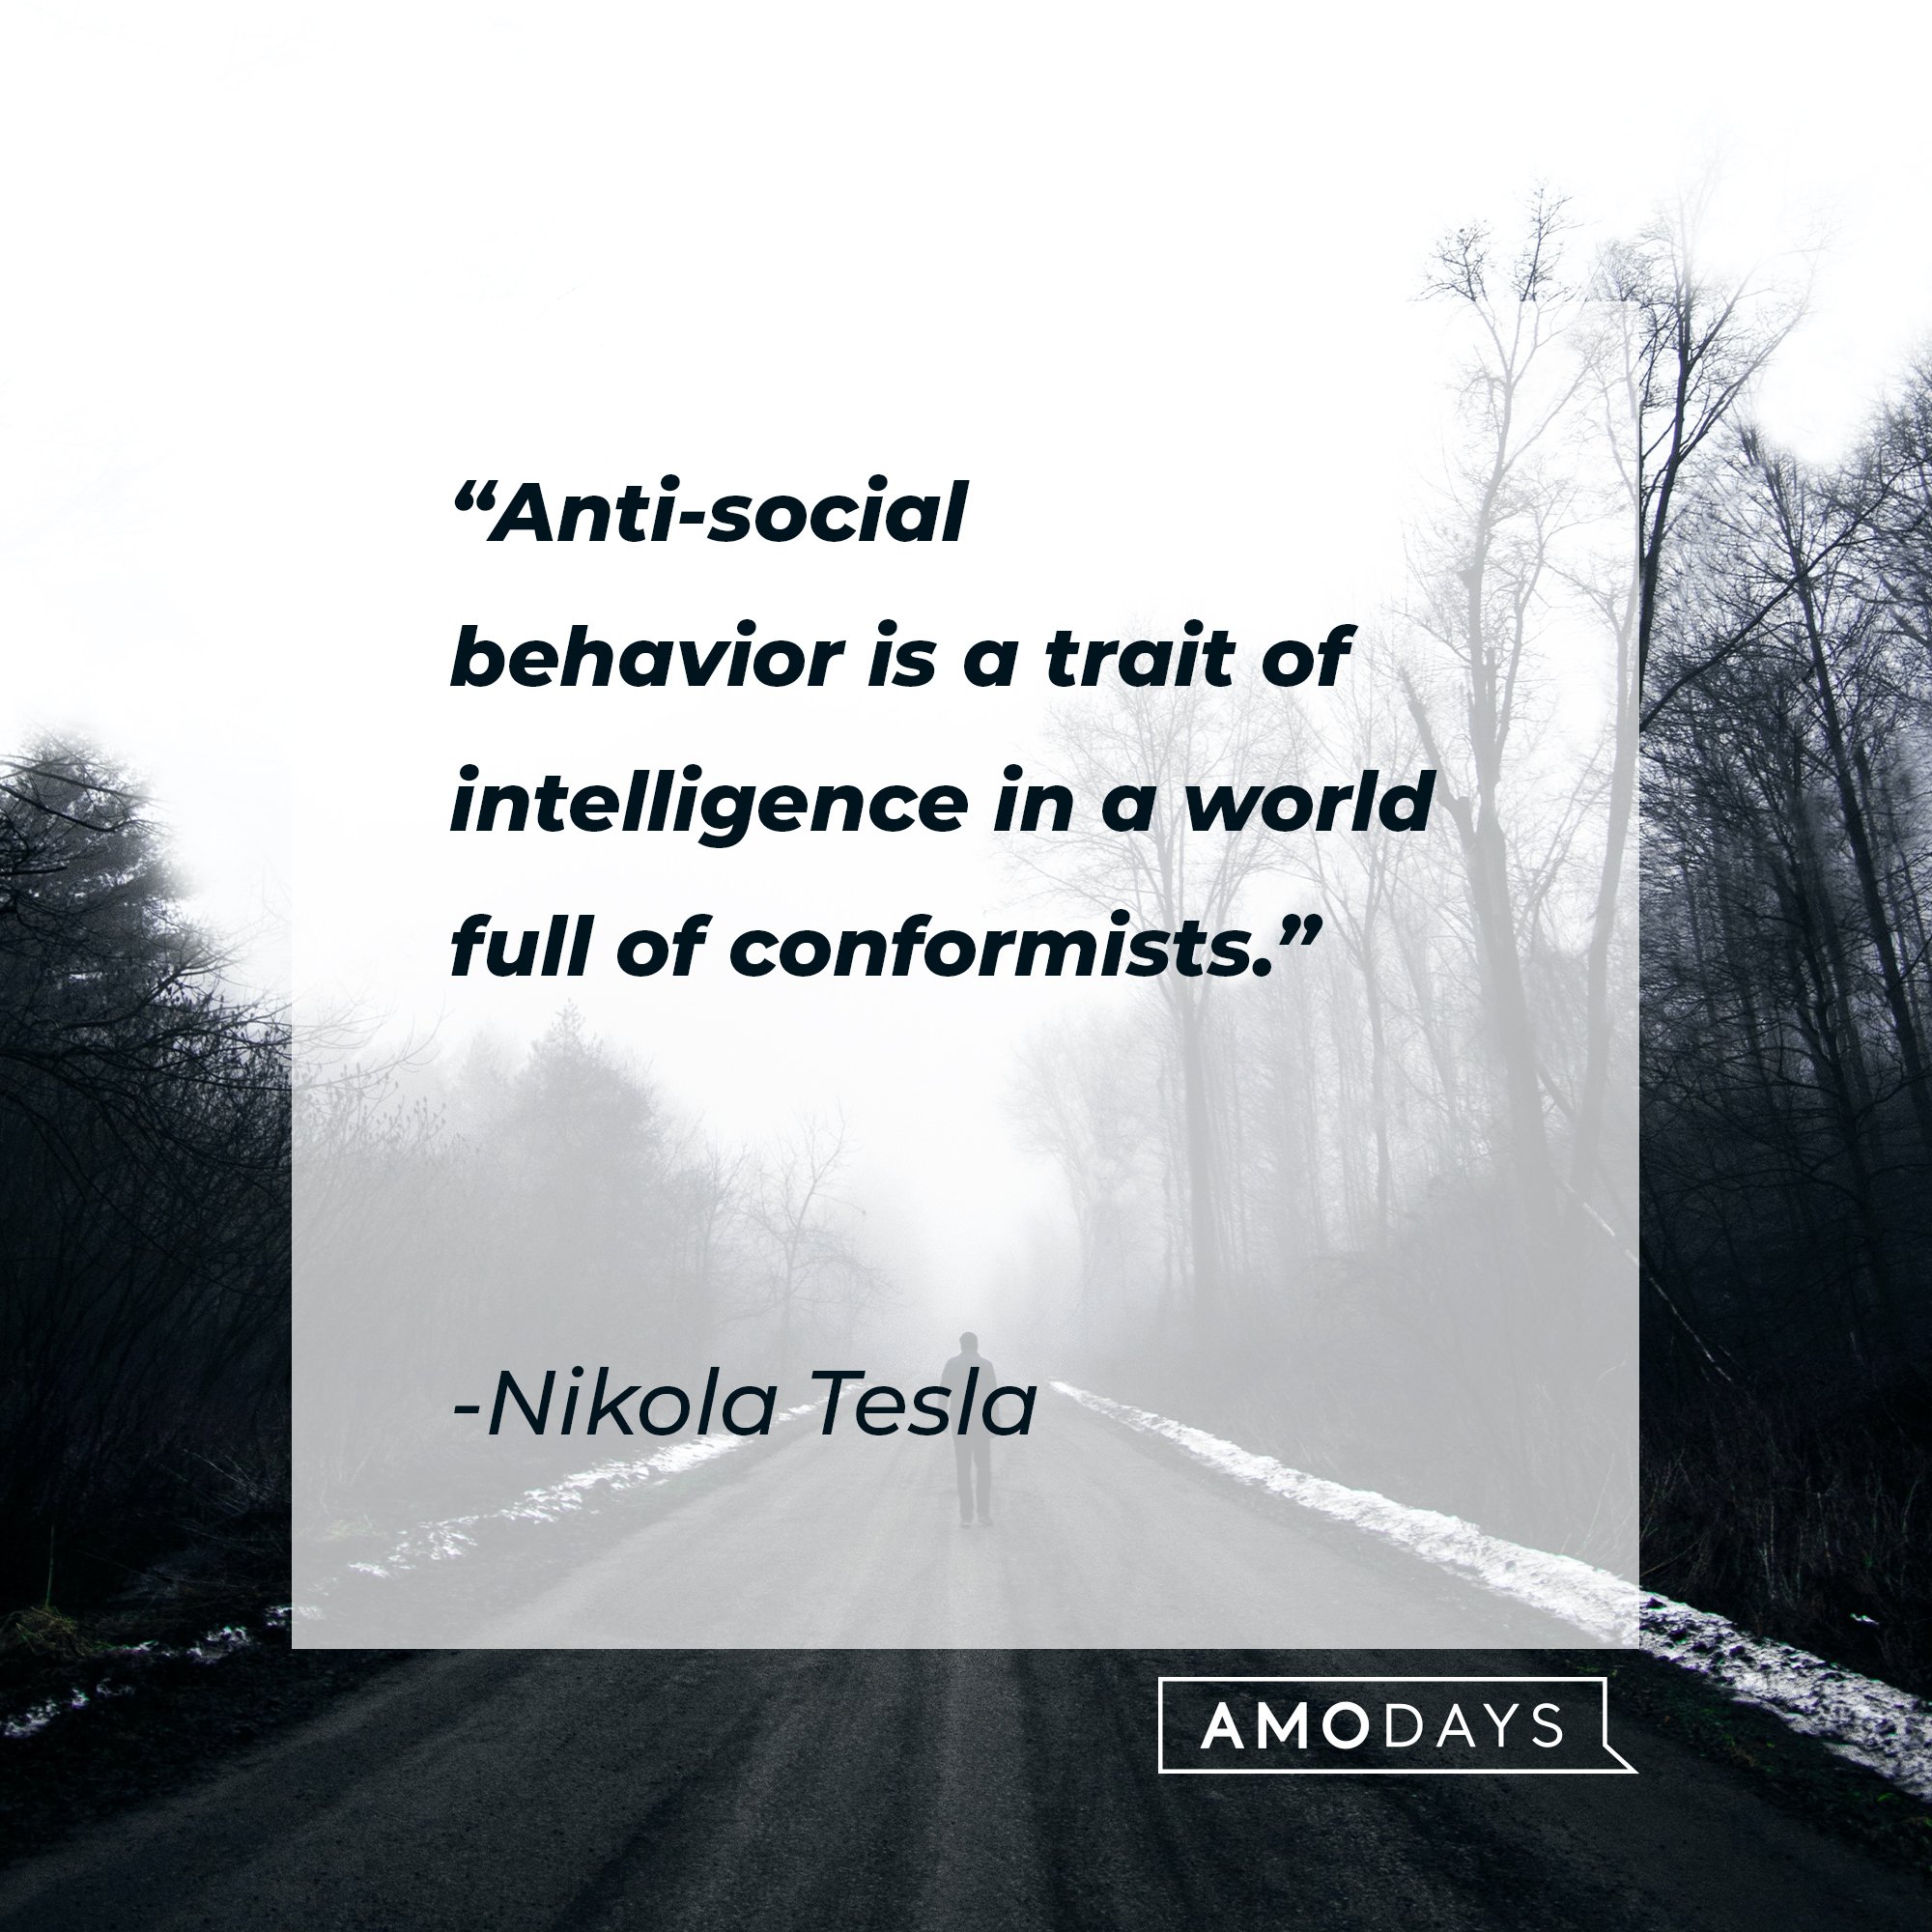 Nikola Tesla’s quote: "Anti-social behavior is a trait of intelligence in a world full of conformists." | Image: AmoDays 